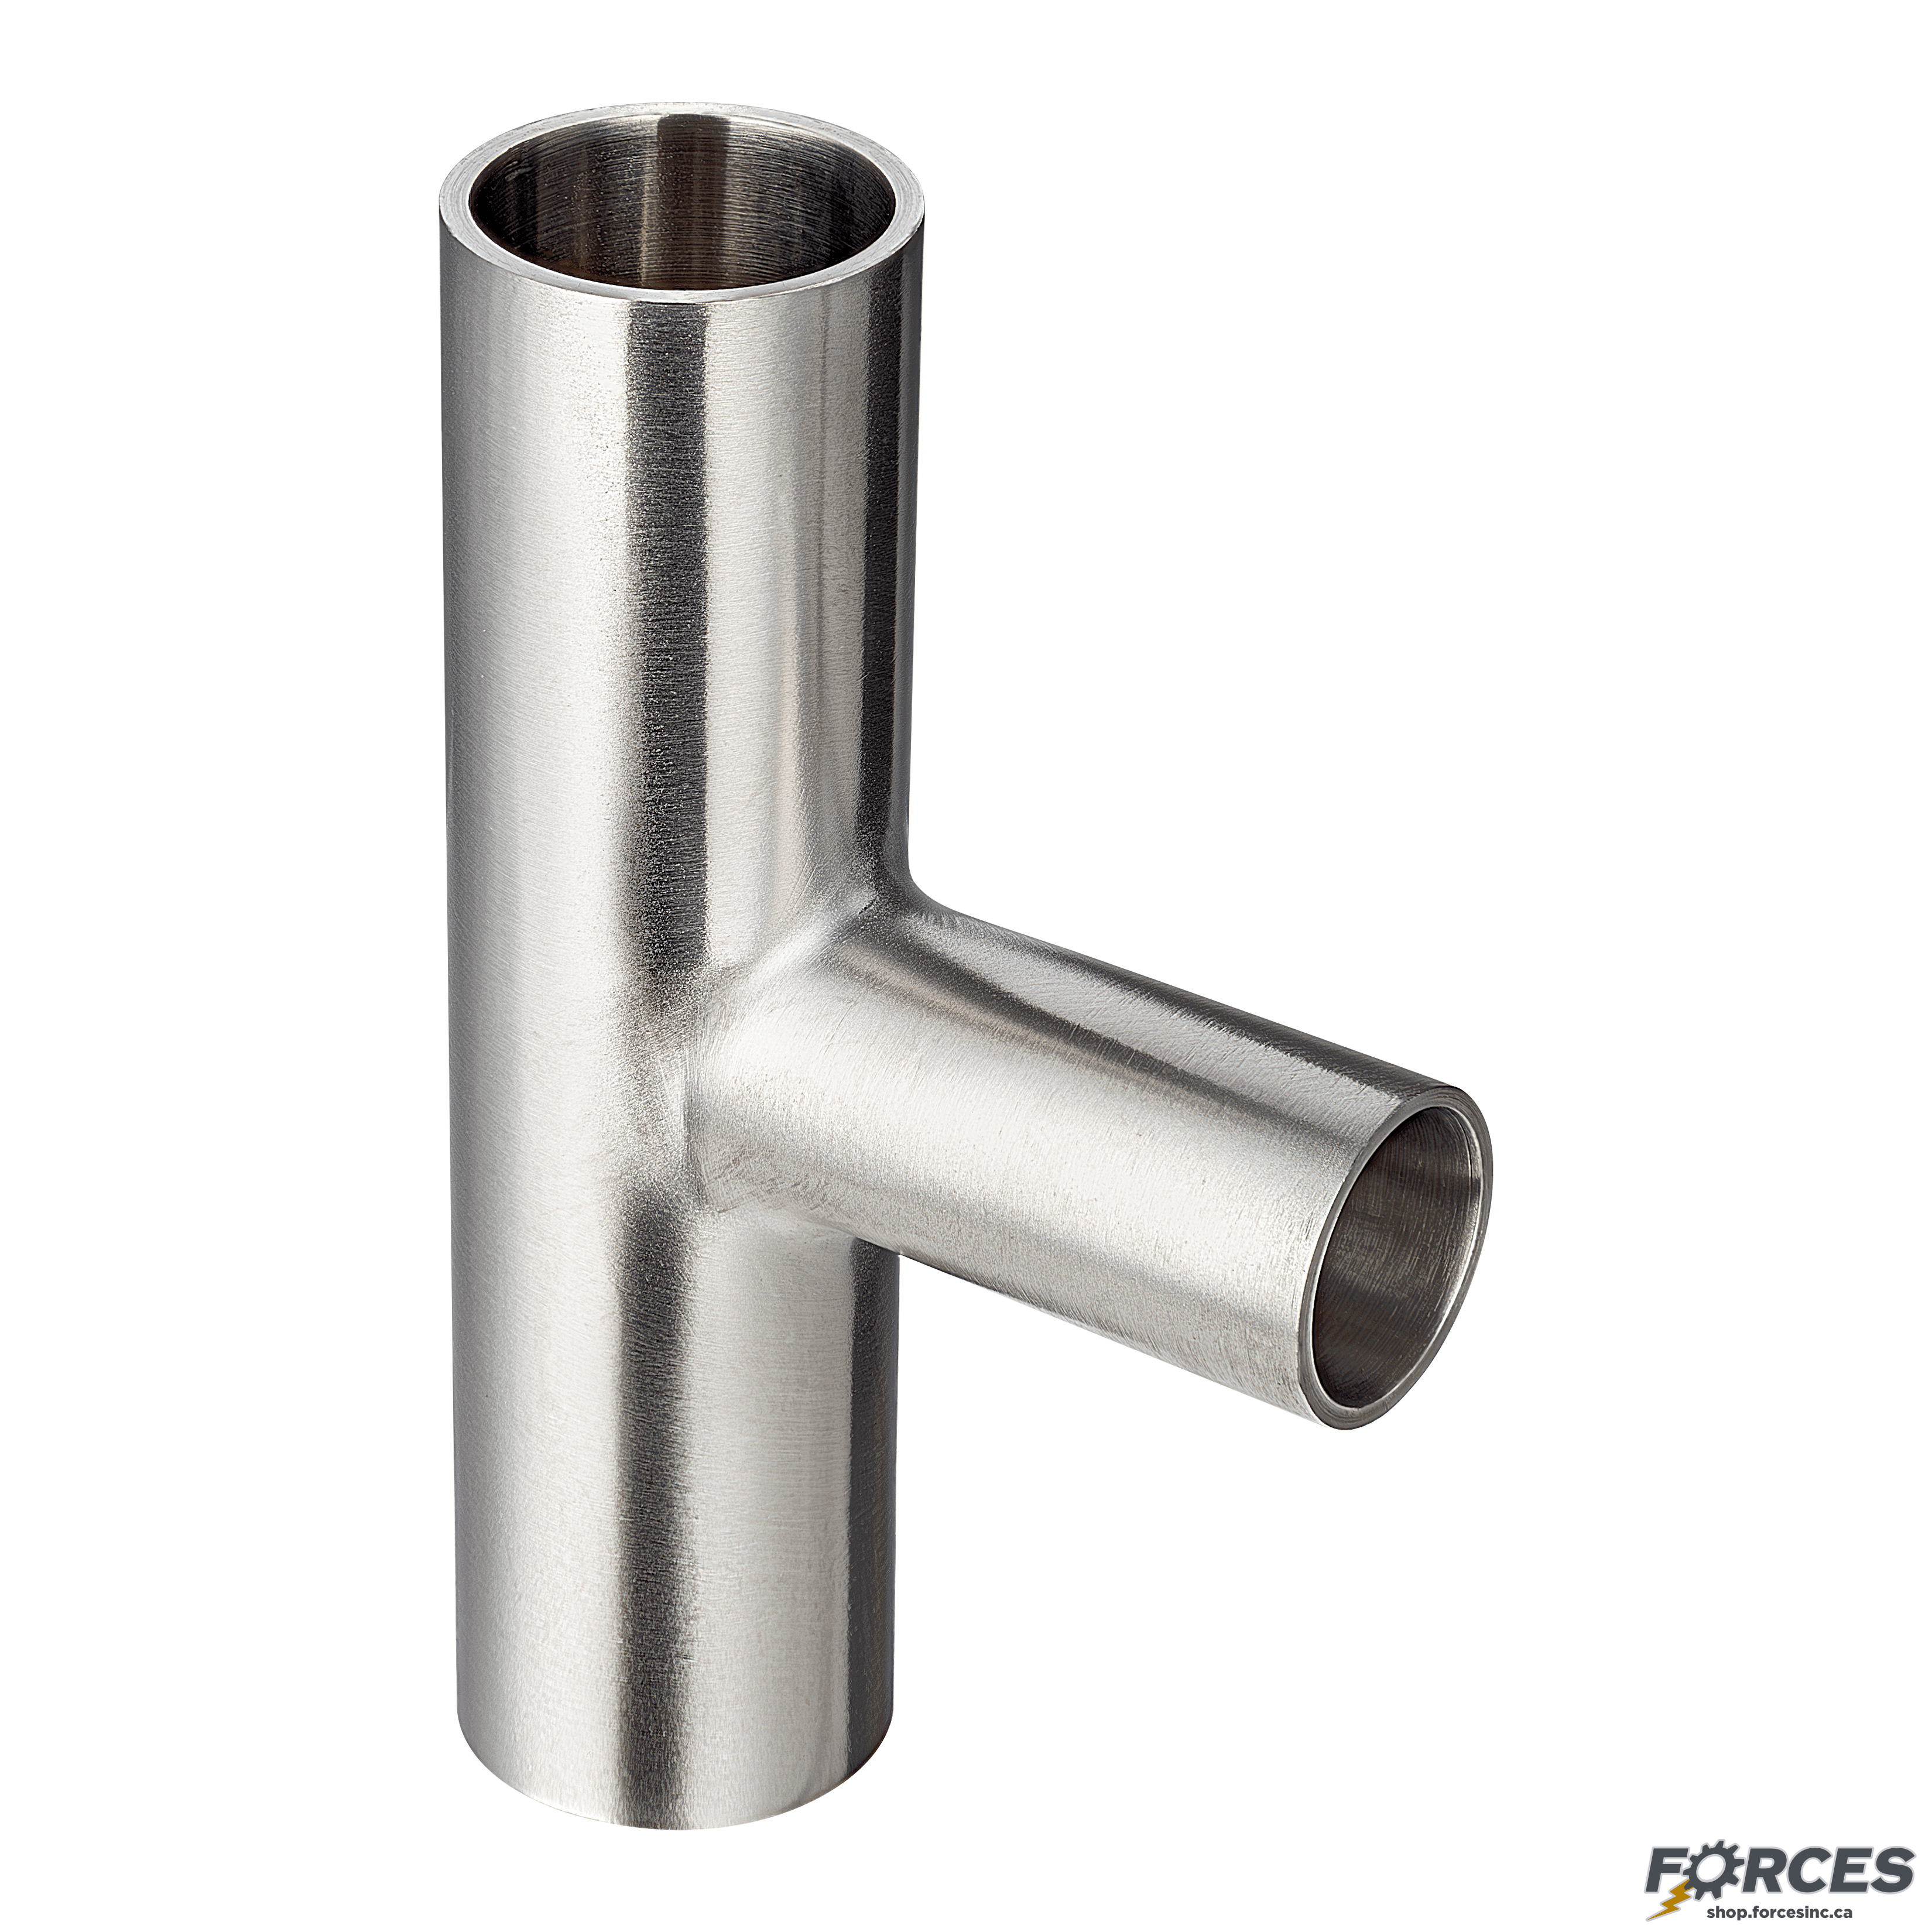 4" x 1-1/2" Butt Weld Tee Reducer - Stainless Steel 304 - Forces Inc